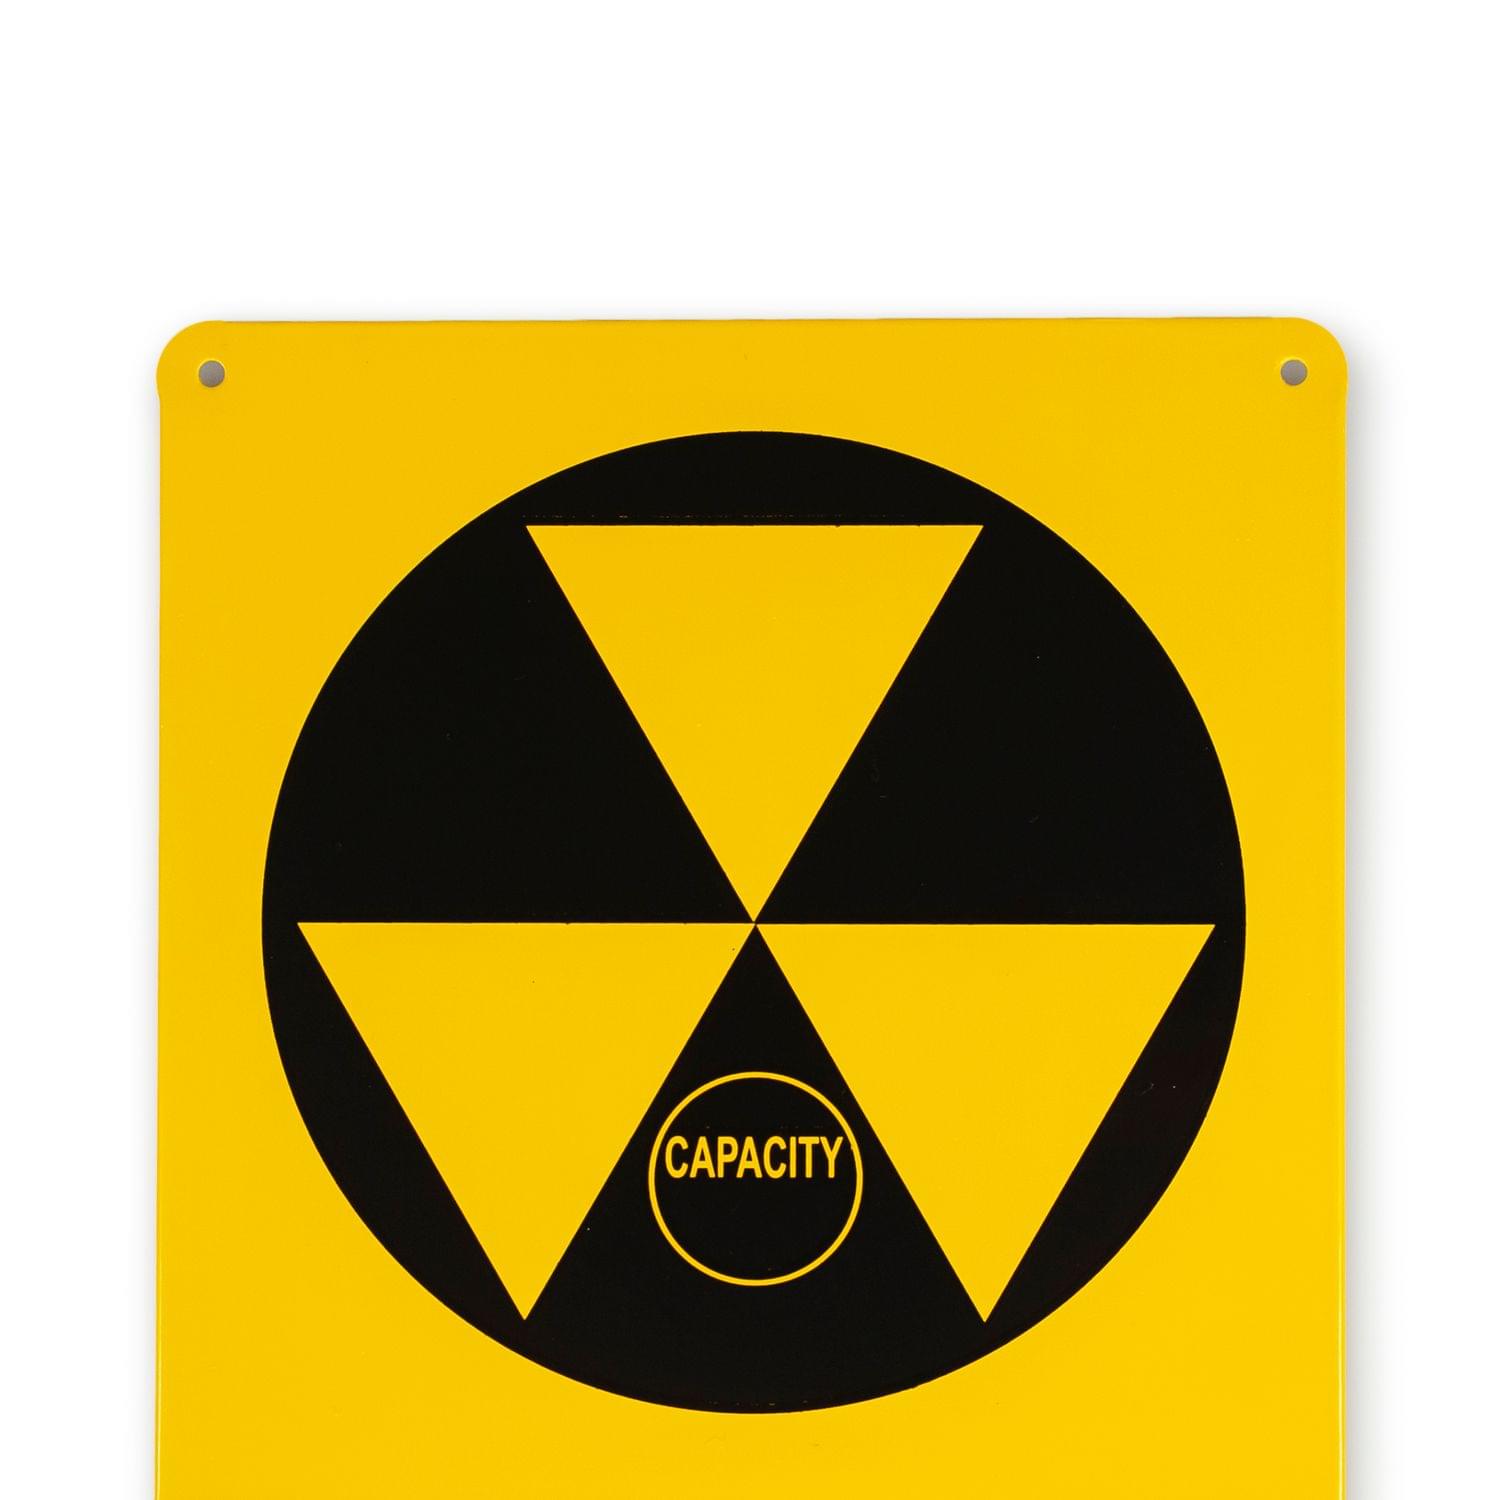 Vintage Fallout Shelter Metal Sign Replica, Nuclear Warning Sign, 6in X 9in